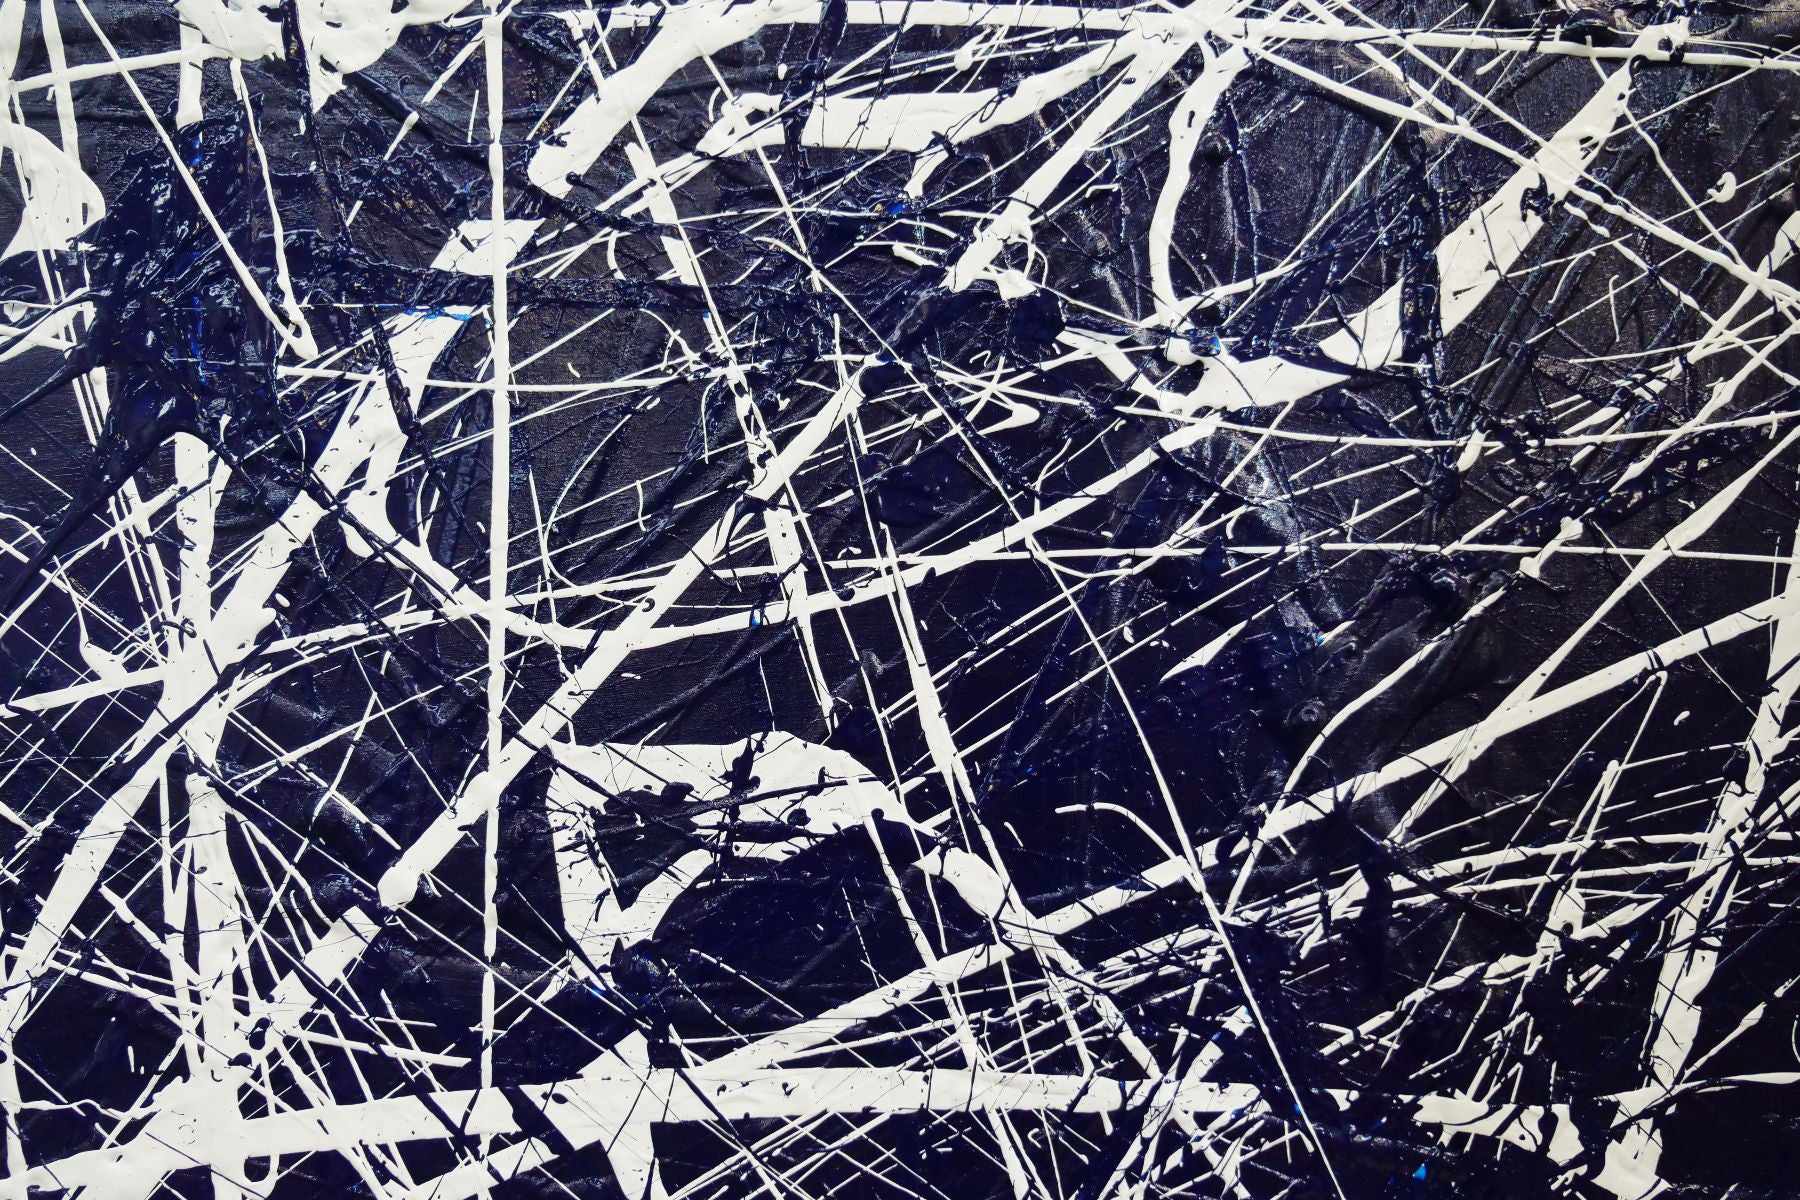 Wild Hamptons 120cm x 120cm White Blue Textured Abstract Painting